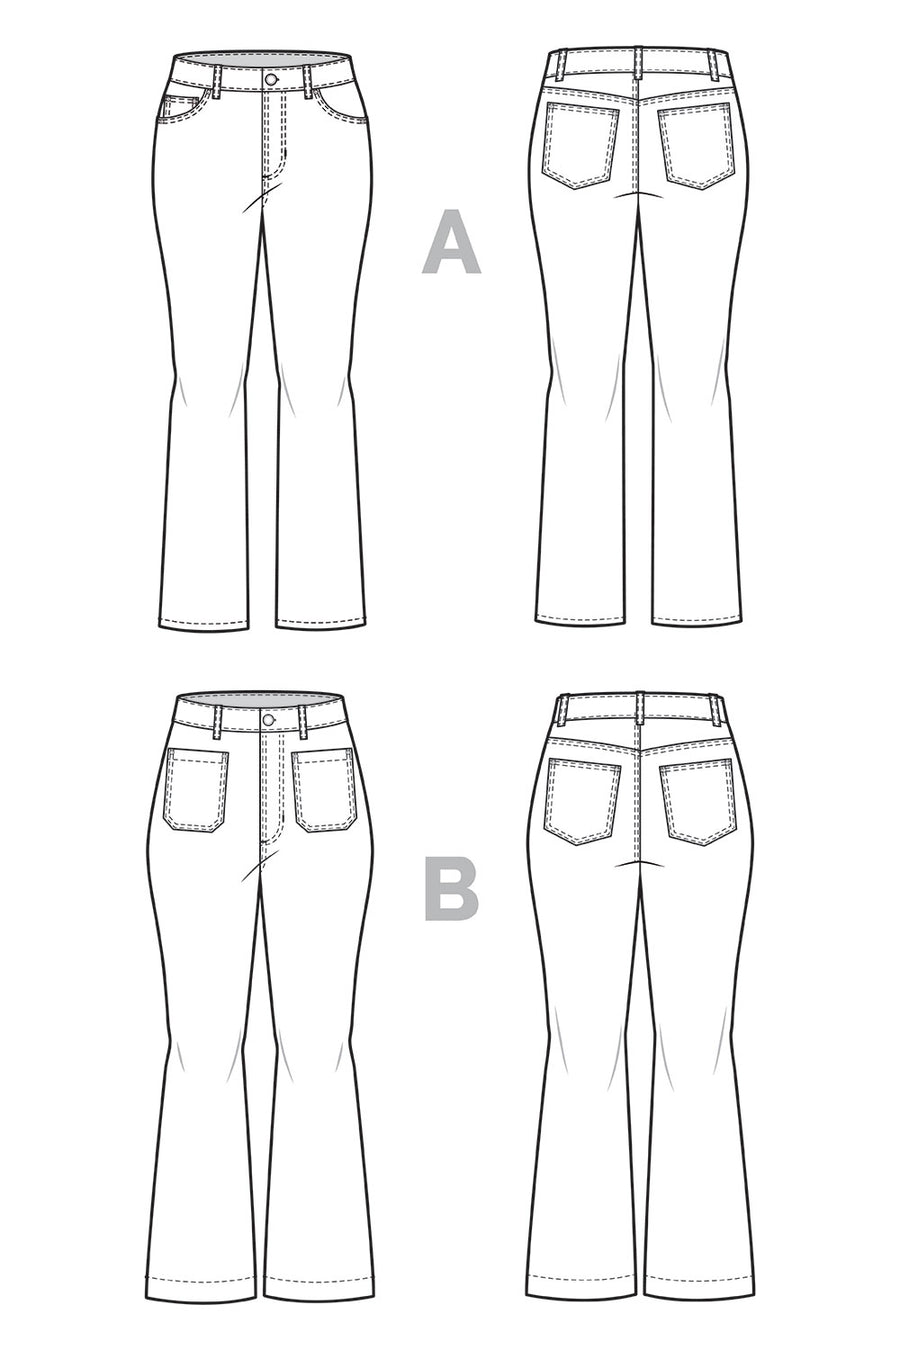 Jude Jeans | Bootcut and Flare Jeans Pattern | Closet Core Patterns